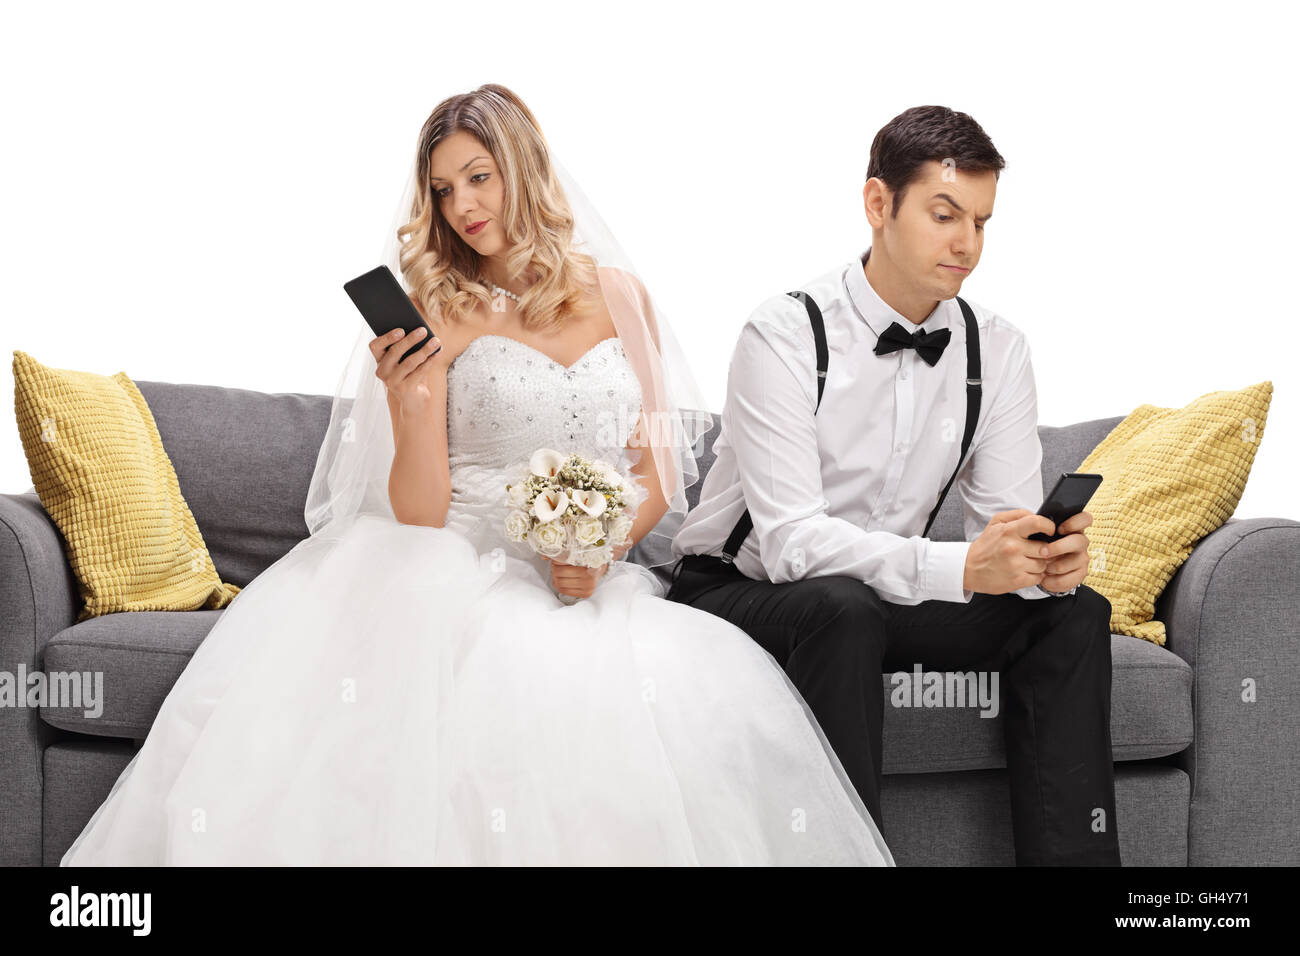 Young married couple seated on a sofa looking at their phones and ignoring each other isolated on white background Stock Photo